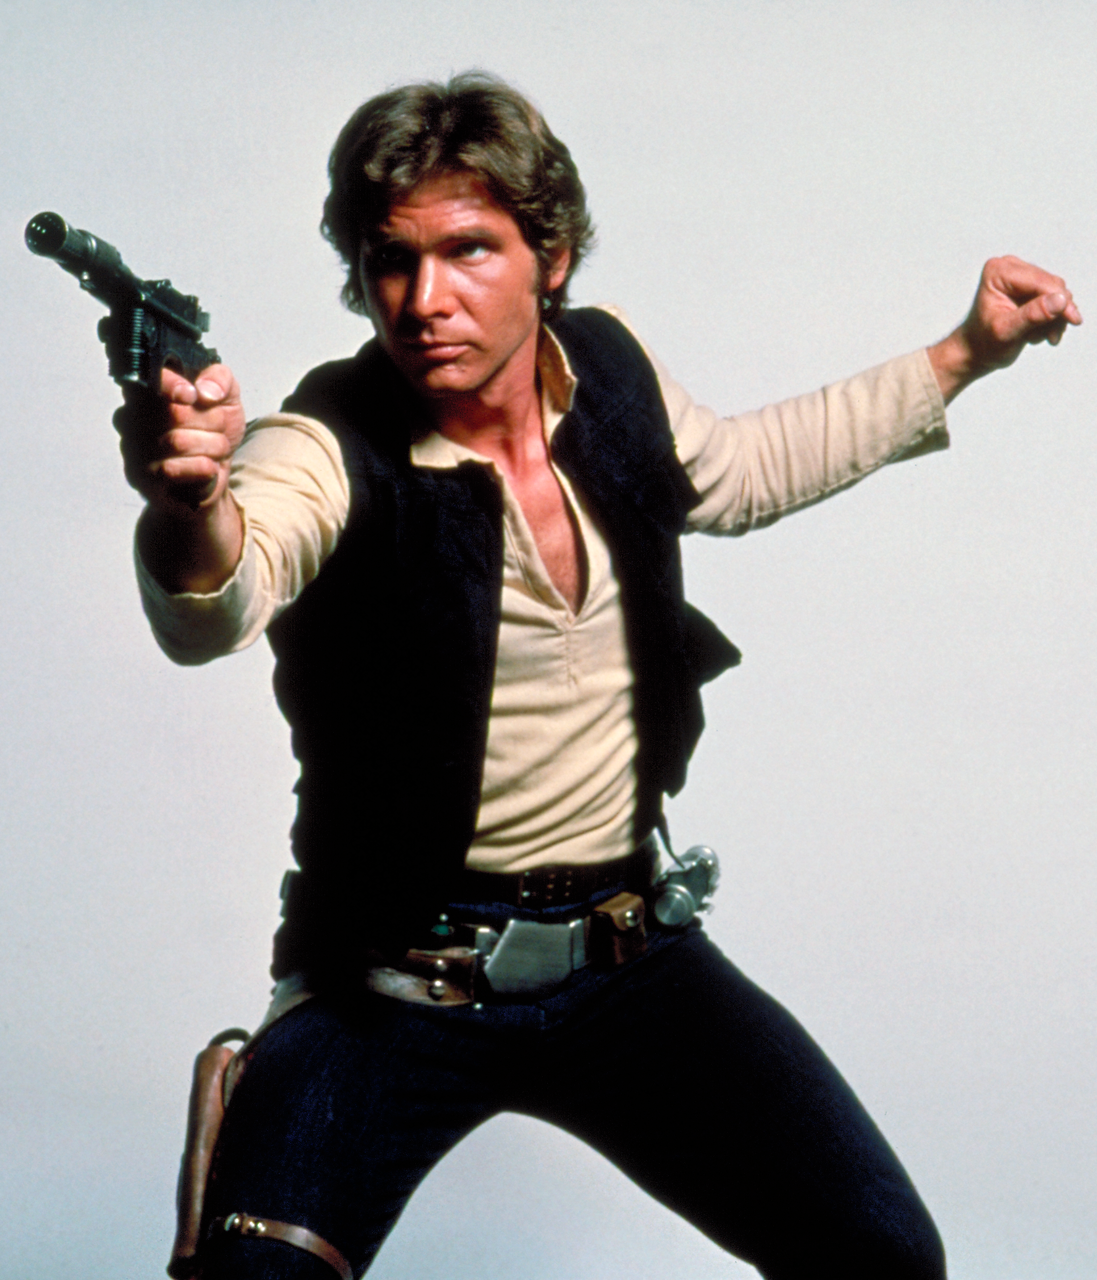 ‘Star Wars: The Last Jedi’ Will Have Han Solo Play A Pivotal Role